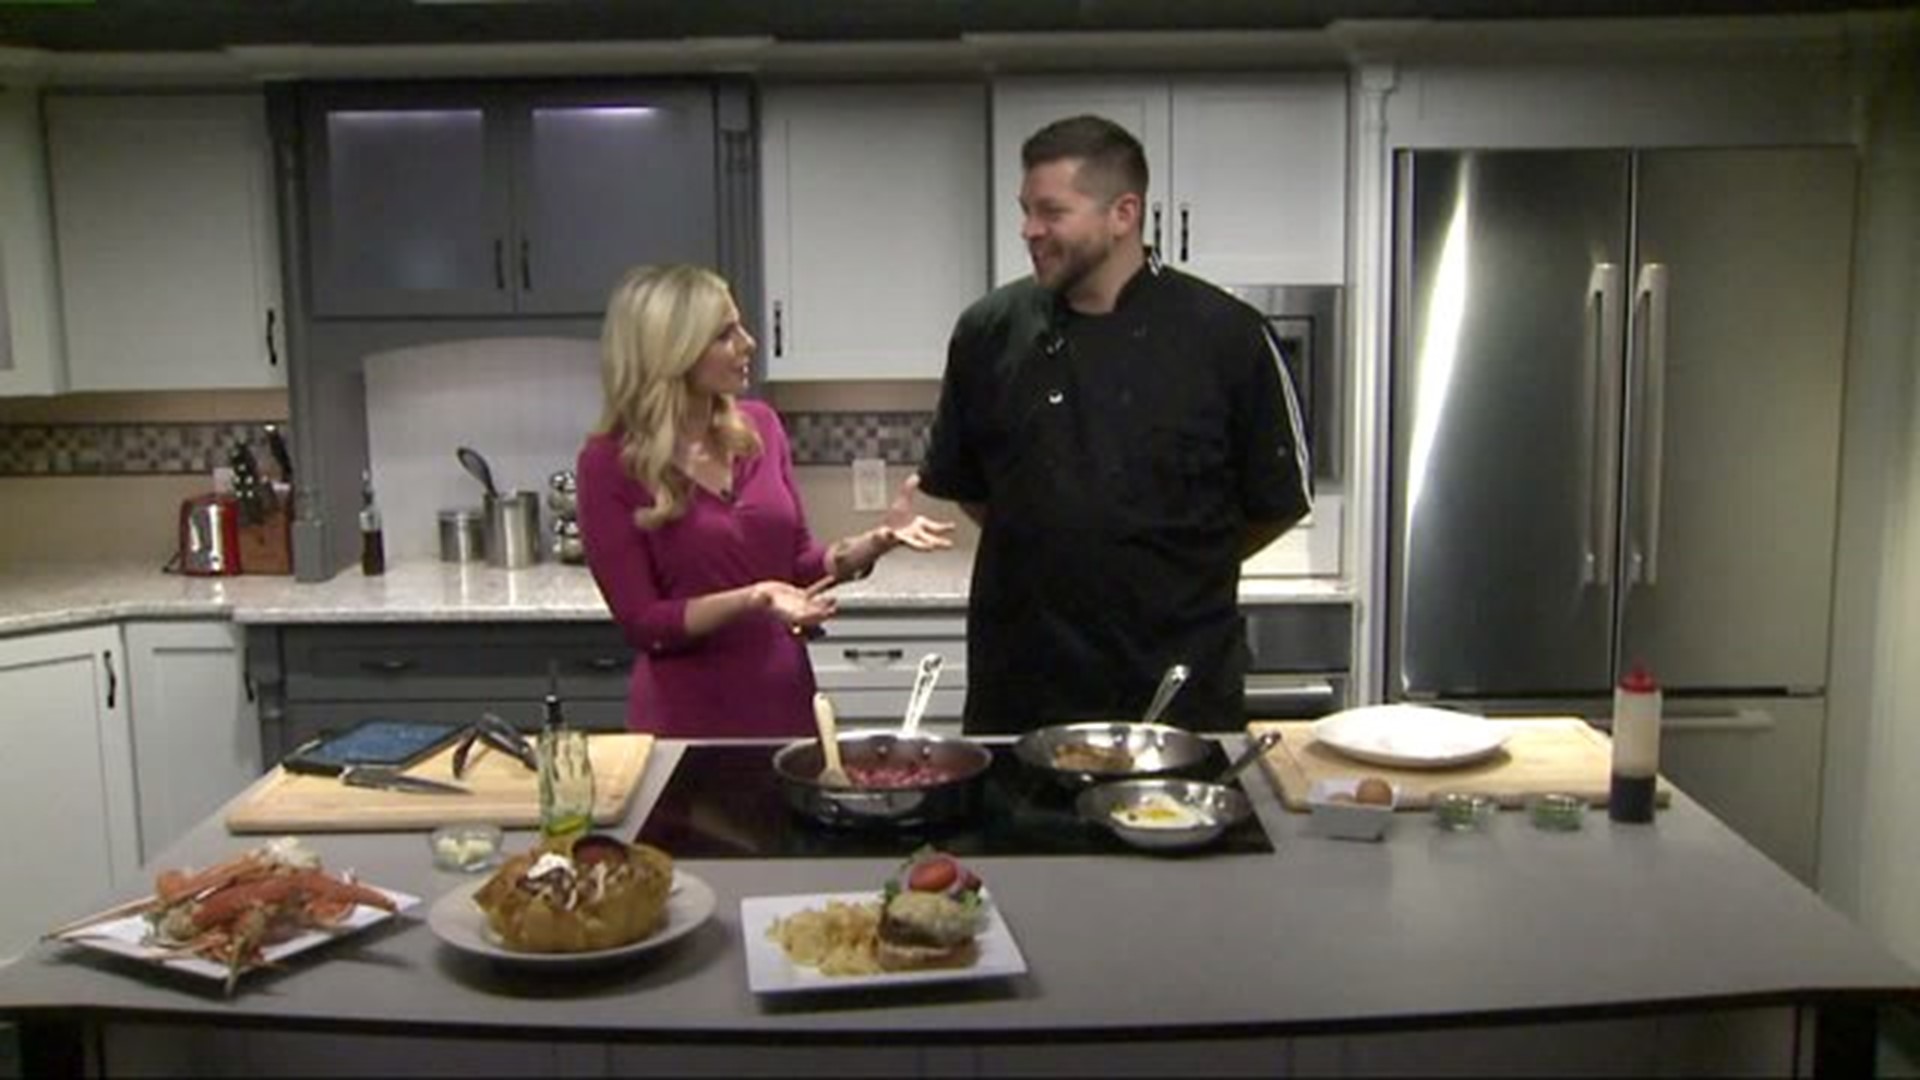 Local chef shares professional dish you can make in your own kitchen